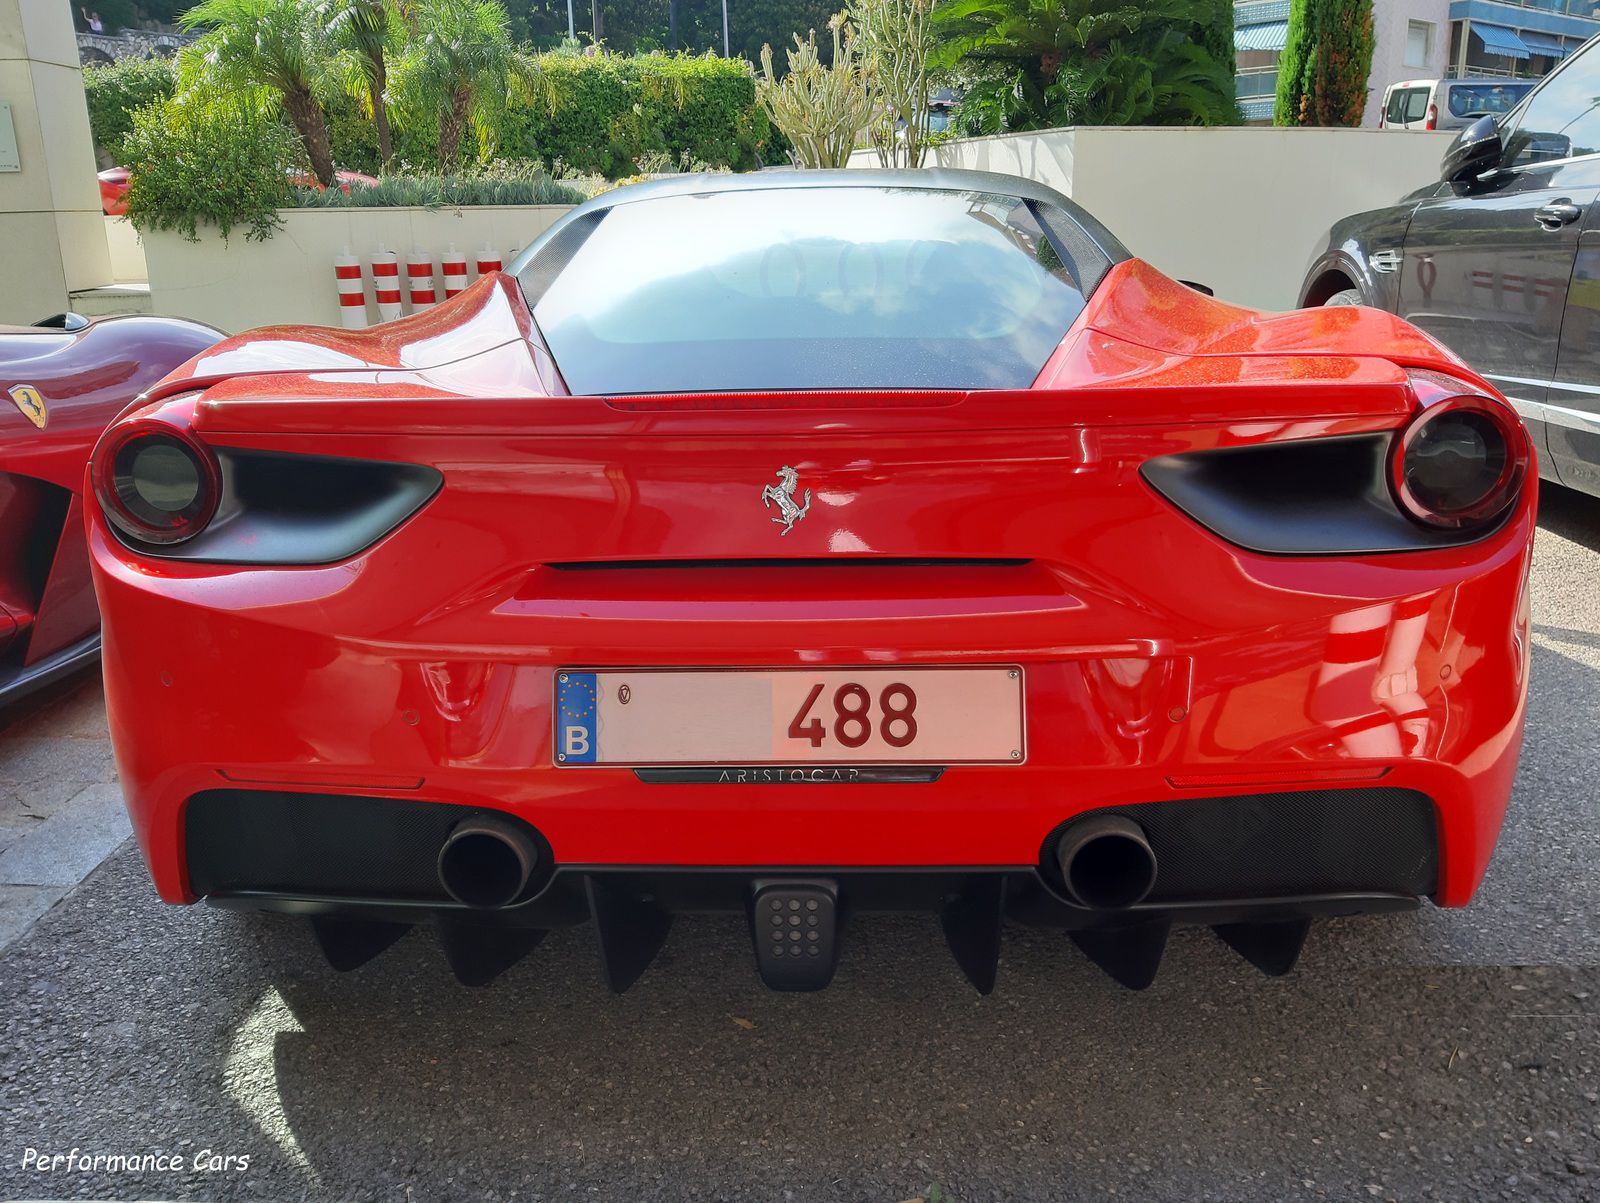 488 red and black